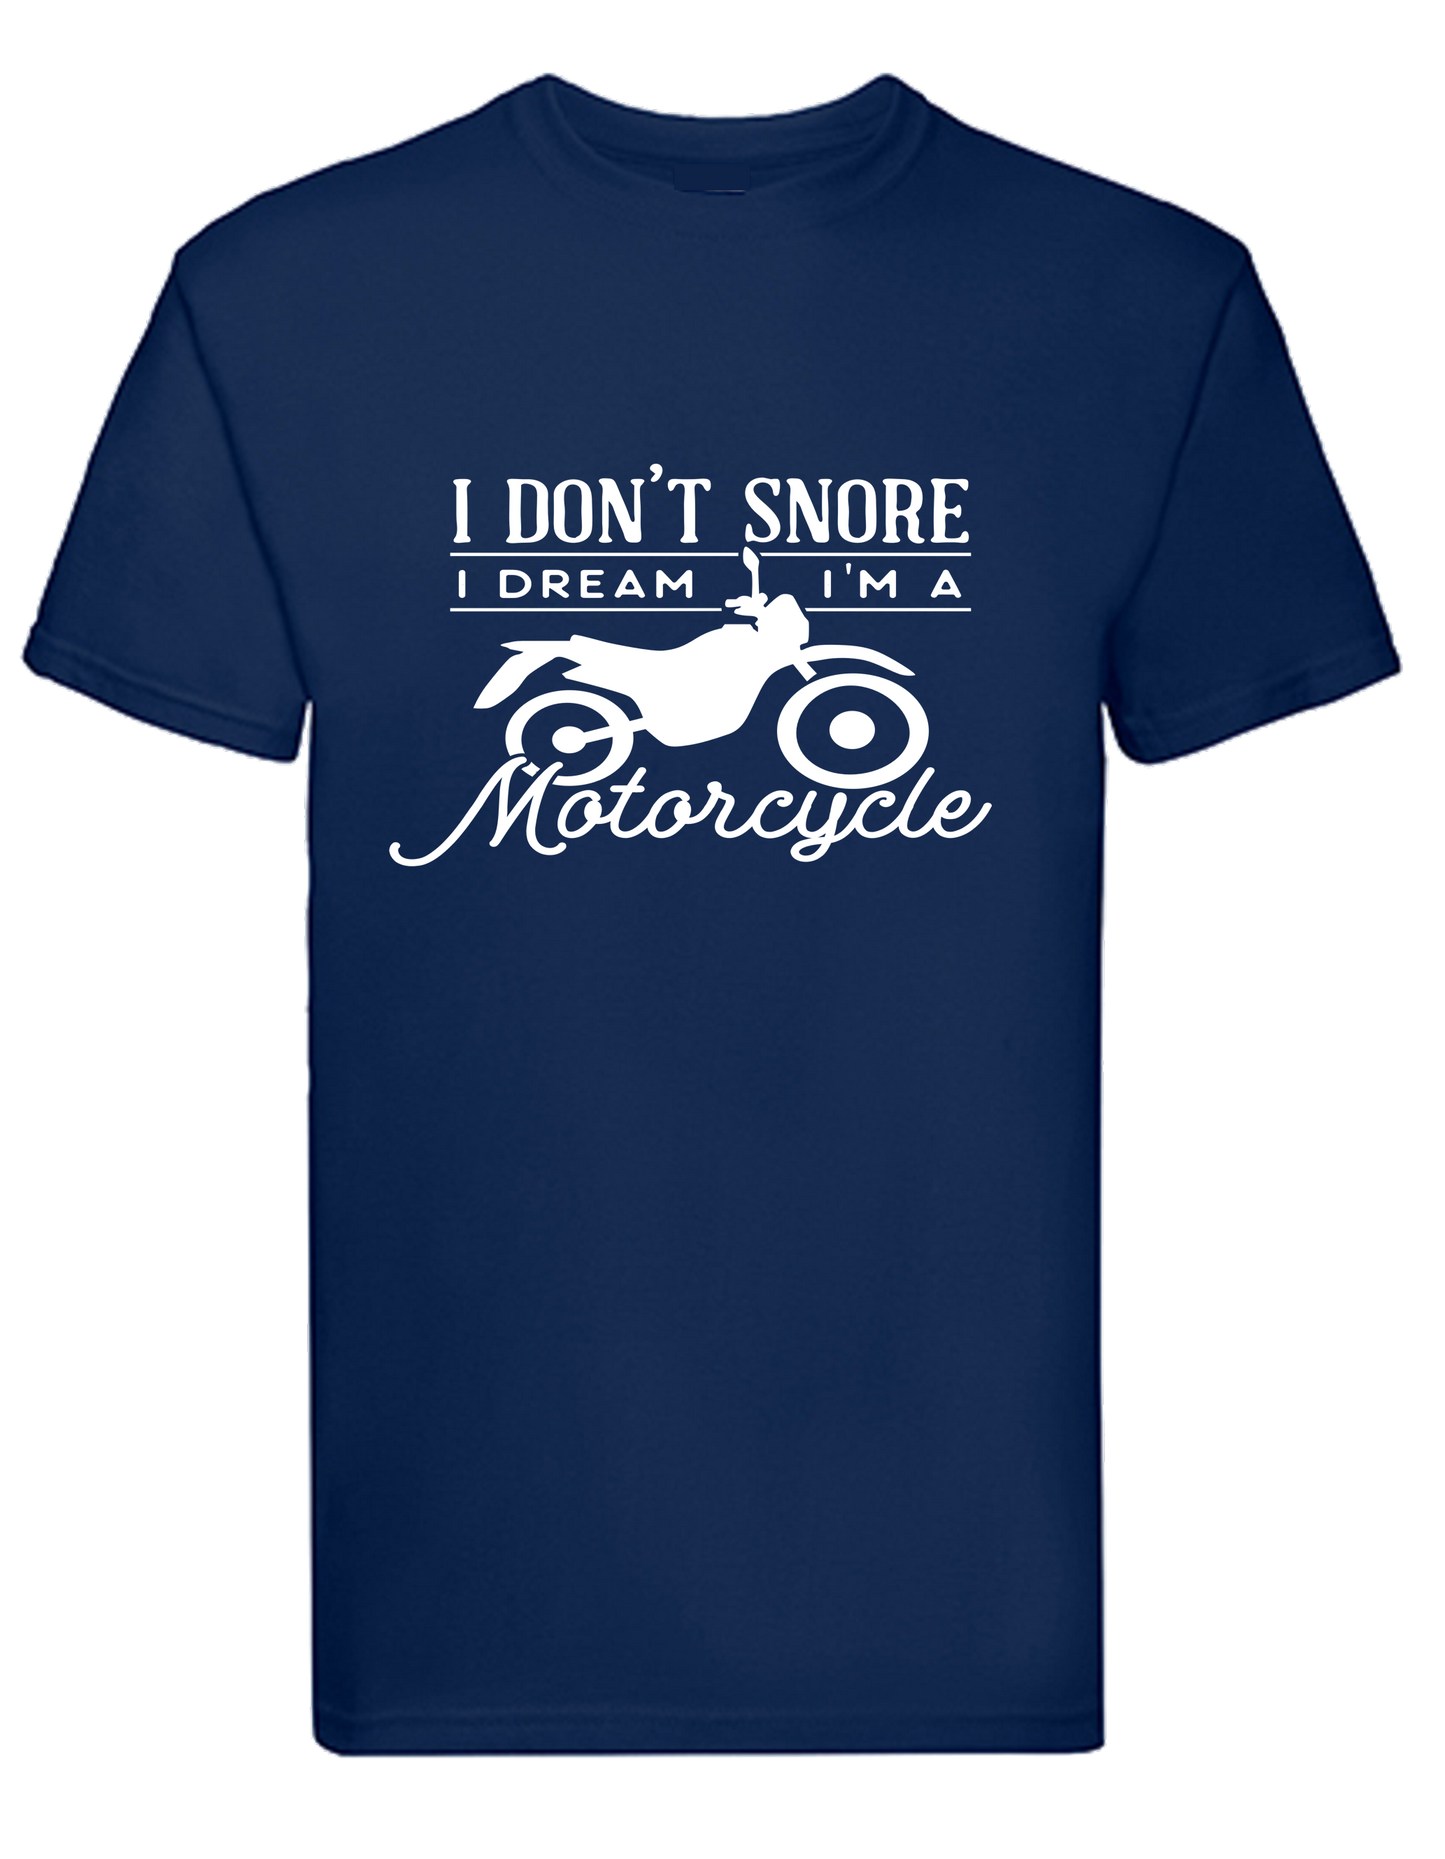 I don't snore